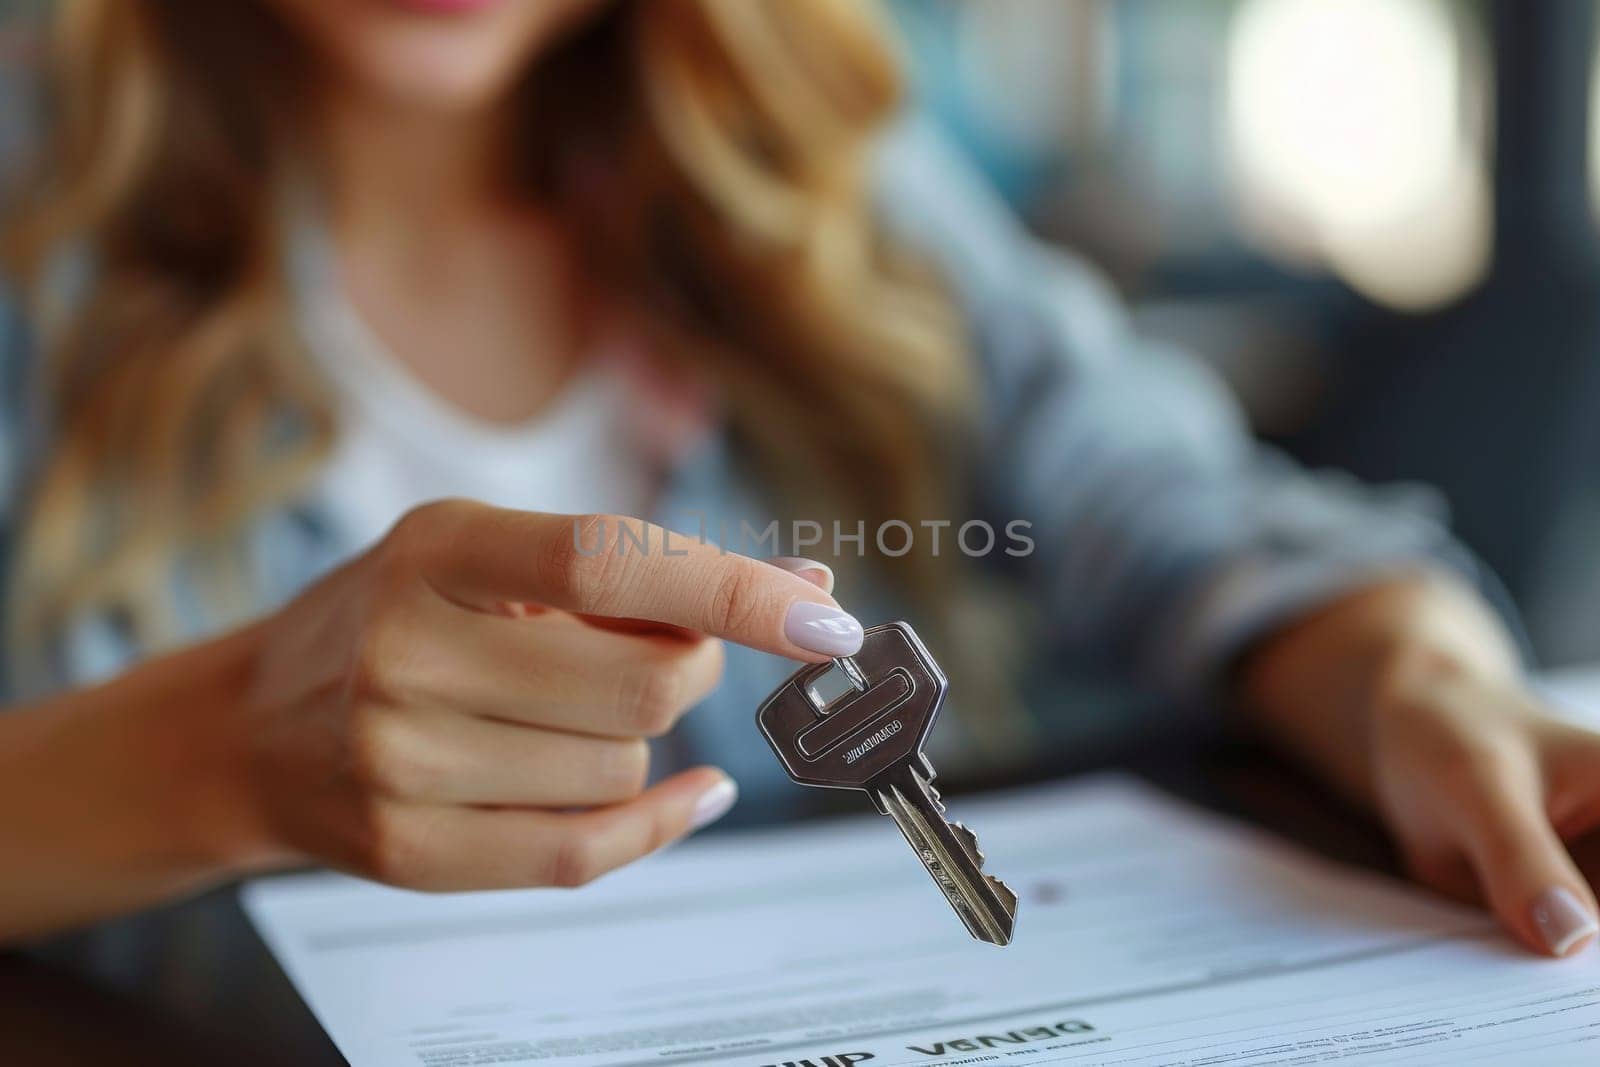 A woman is holding a key in her hand and pointing to a piece of paper. The paper has a key on it, and the woman is looking at it. Scene is curious and inquisitive